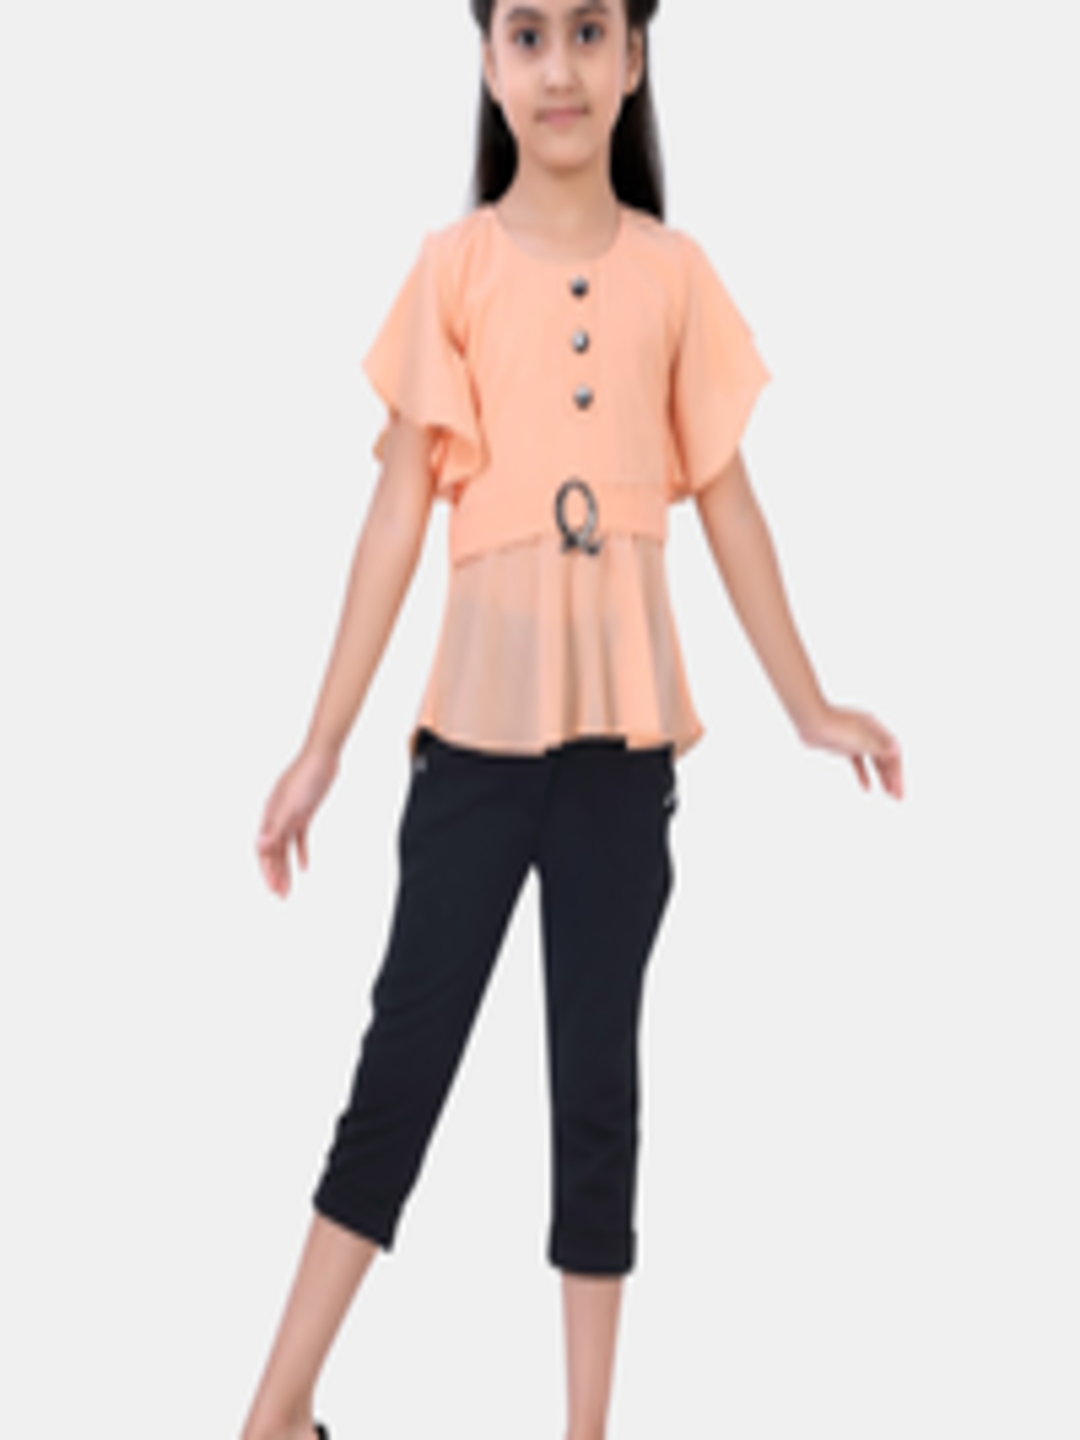 Buy POPLINS Girls Peach Coloured & Black Top With Capris - Clothing Set ...